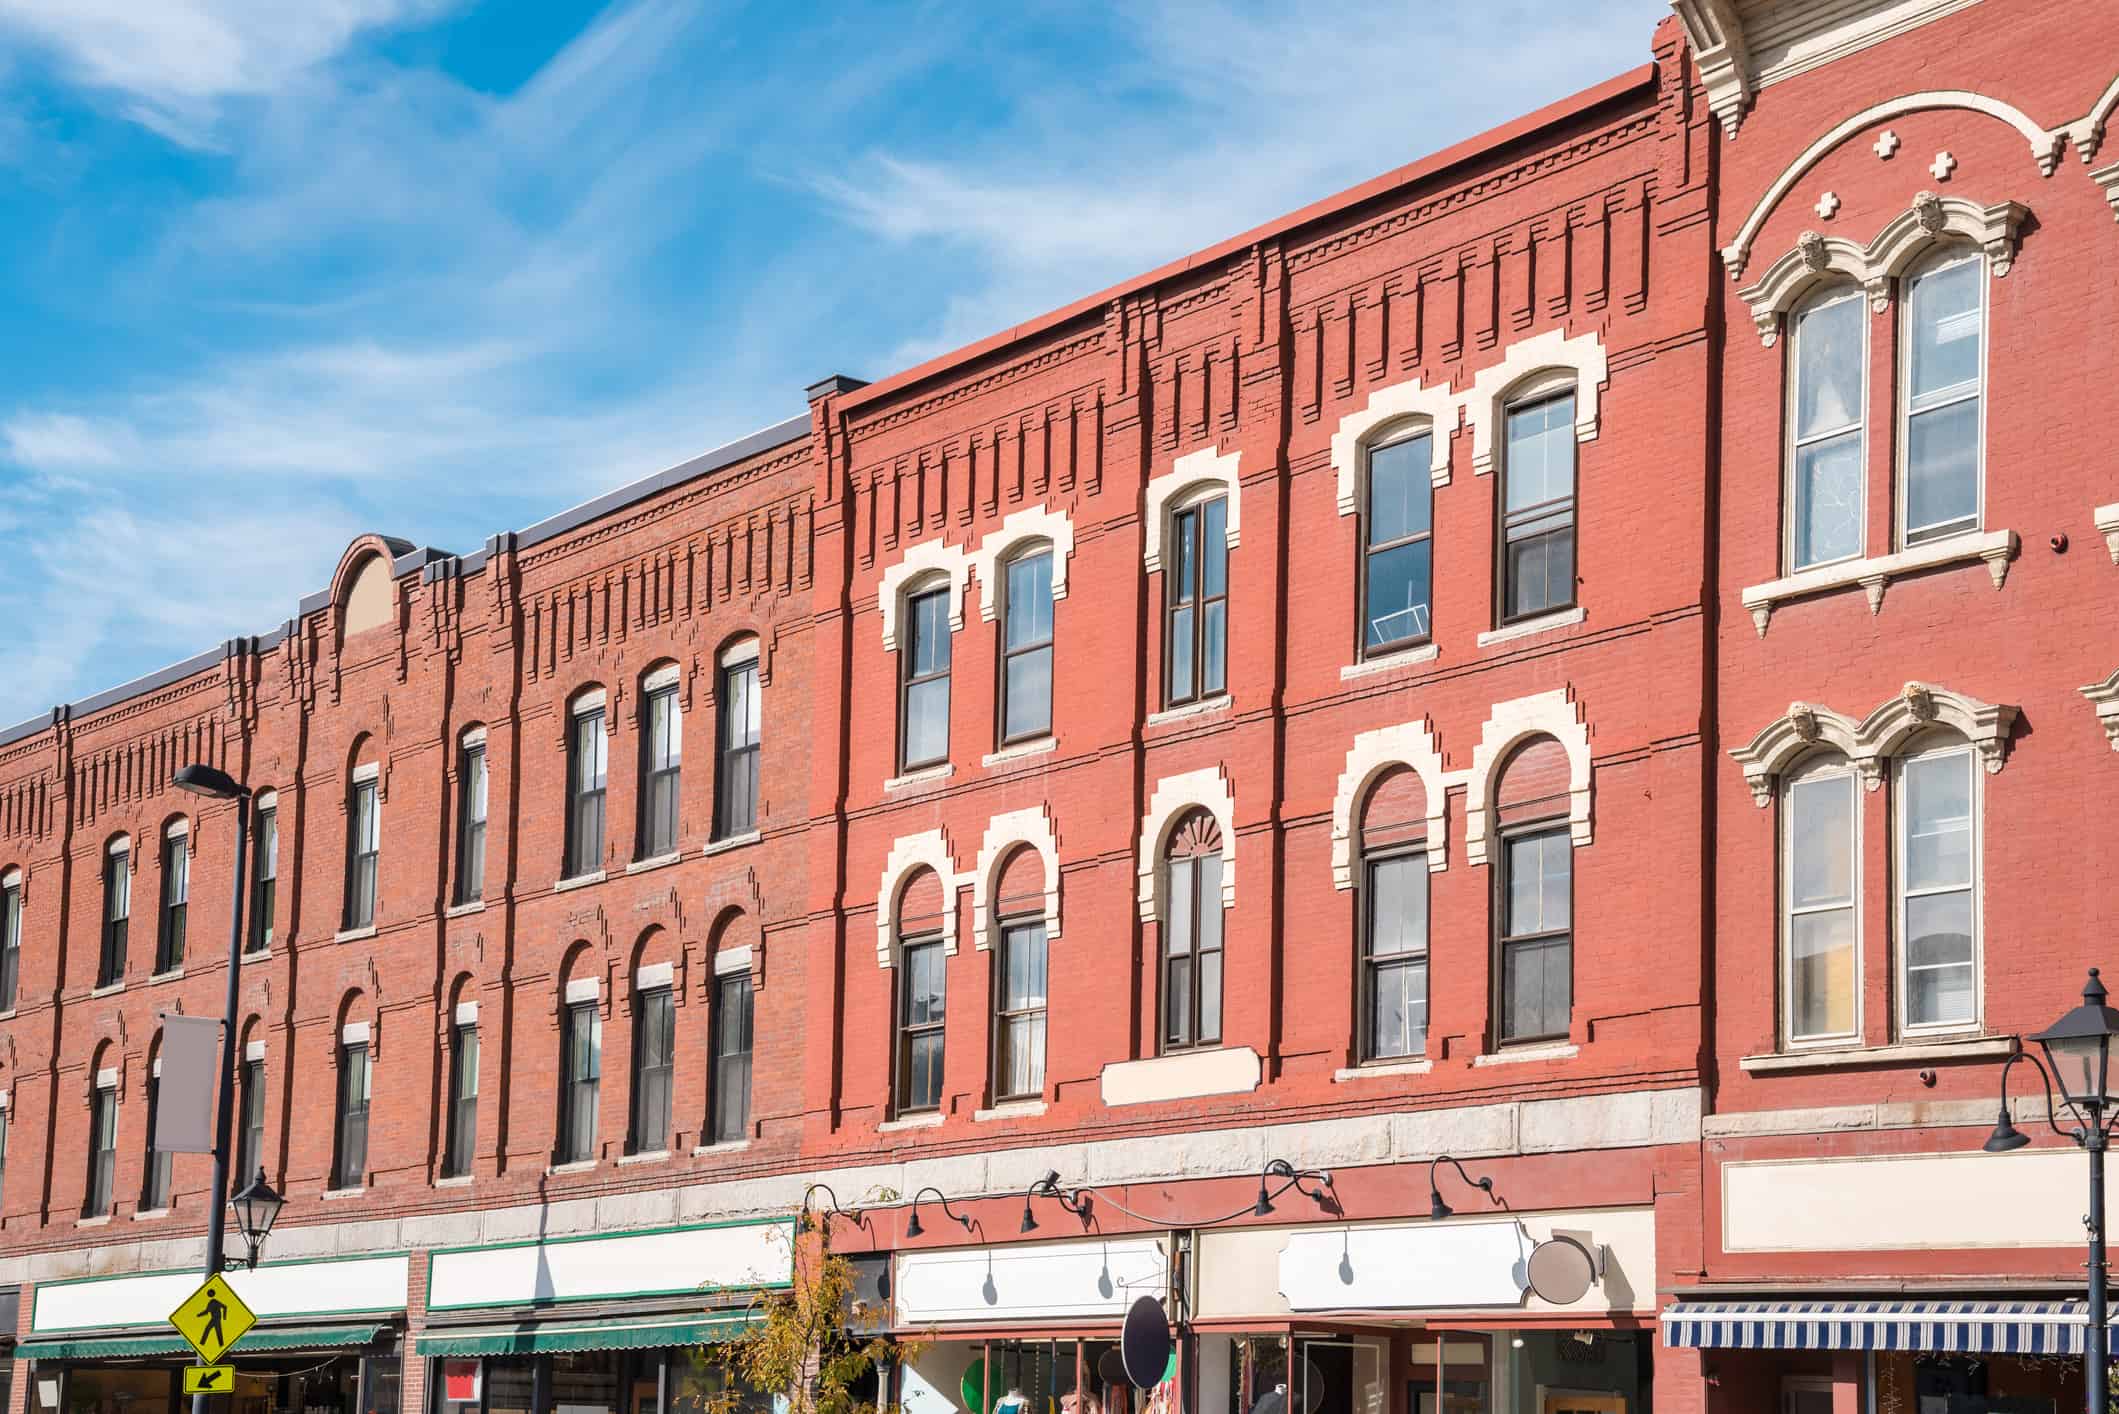 Row of traditional American brick buildings and blue sky